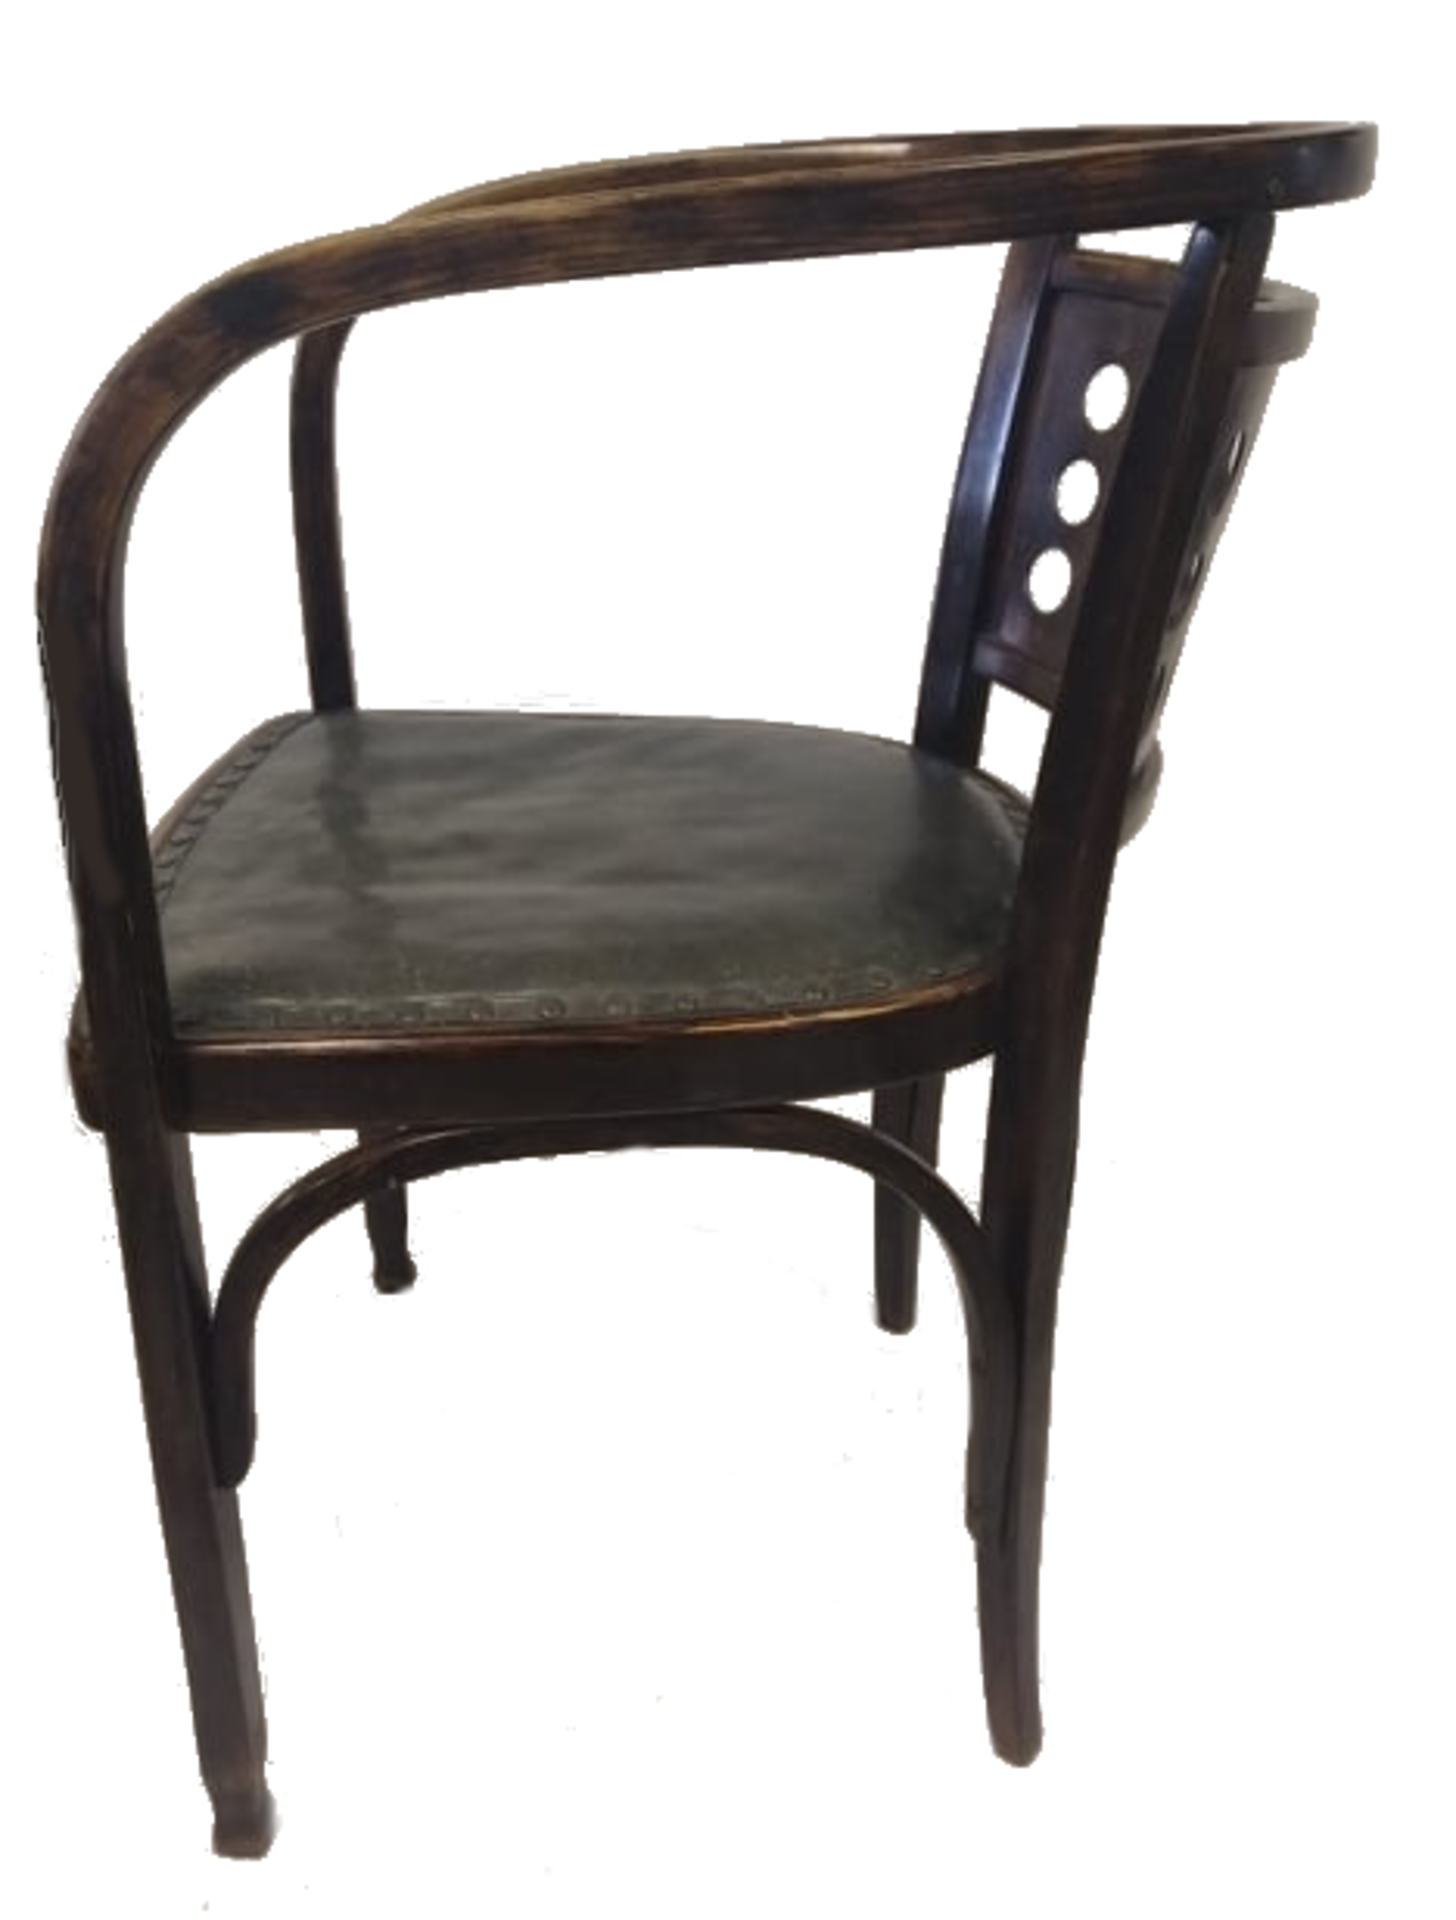 Otto Wagner | Thonet | 6526 - Image 2 of 8